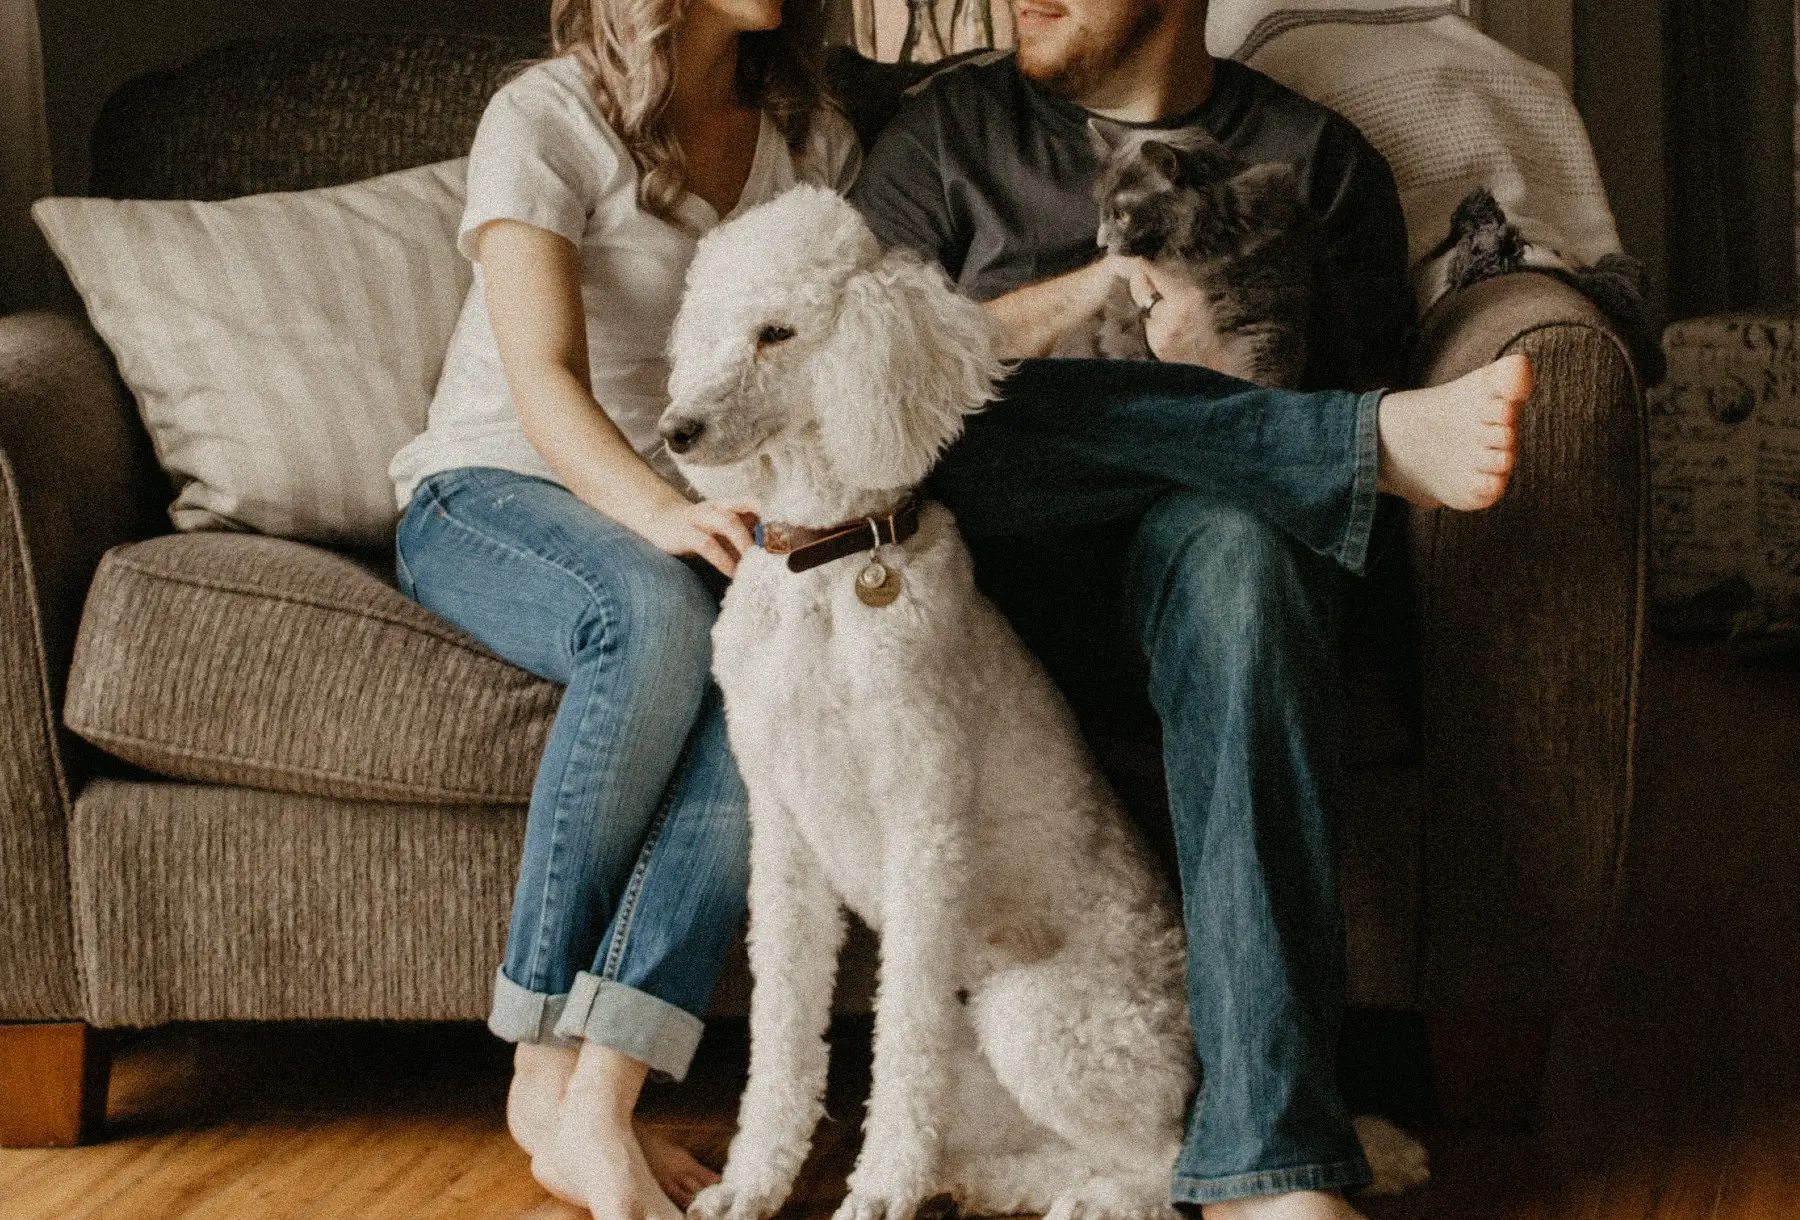 A cosy shot of a couple living together and cuddled up on the sofa with their cat and dog